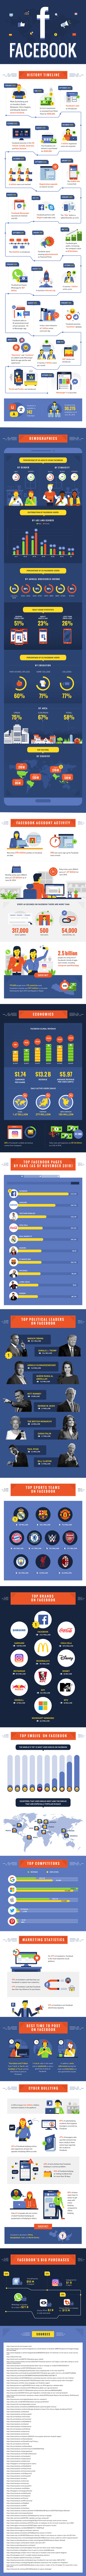 69 Facebook Statistics for 2019 That Marketers Need to Know (Infographic)